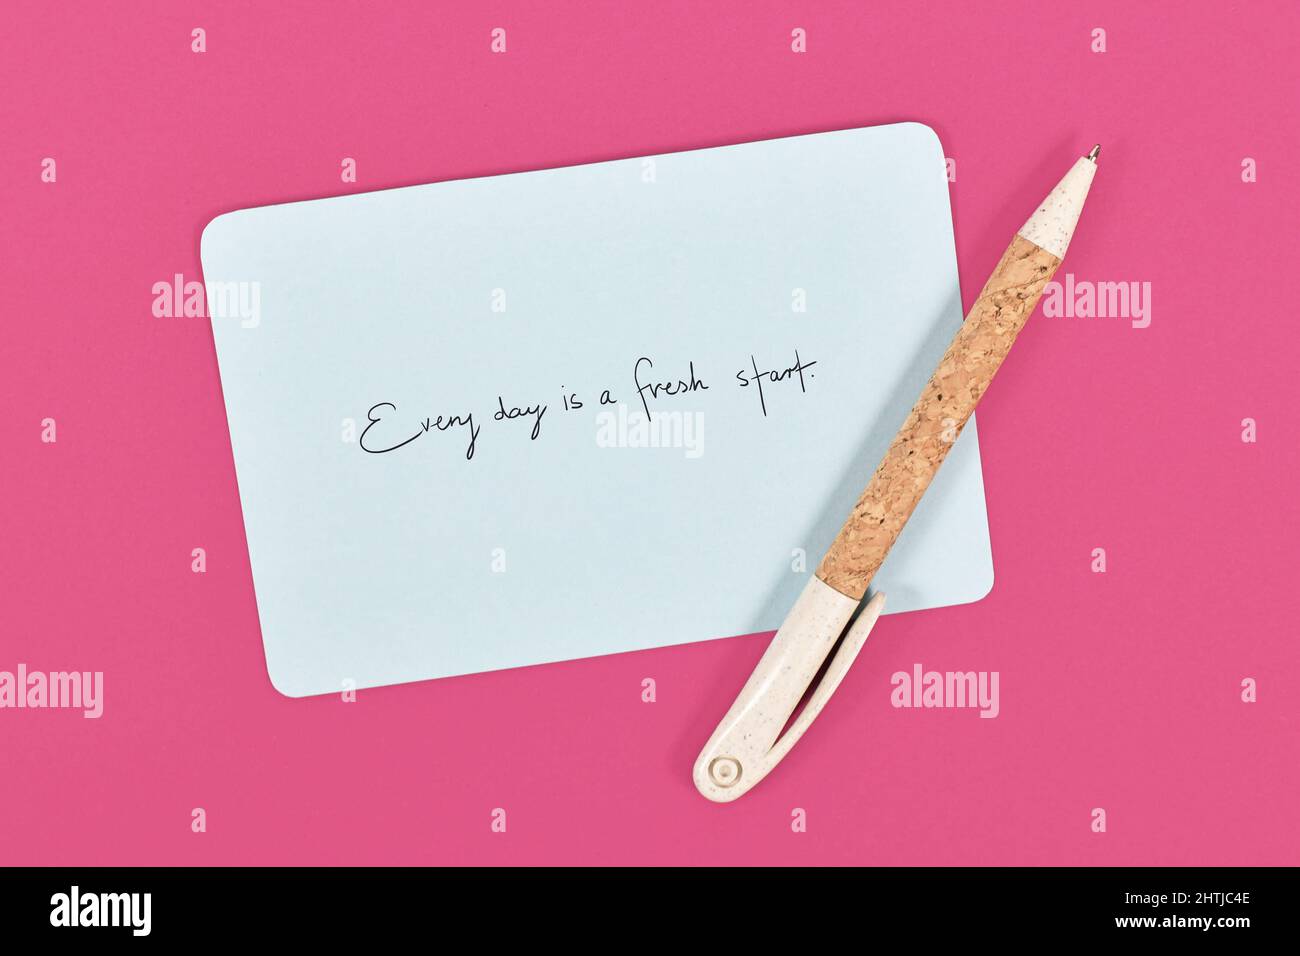 Motivational text 'Every day is a fresh starts' on blue paper note on pink background Stock Photo